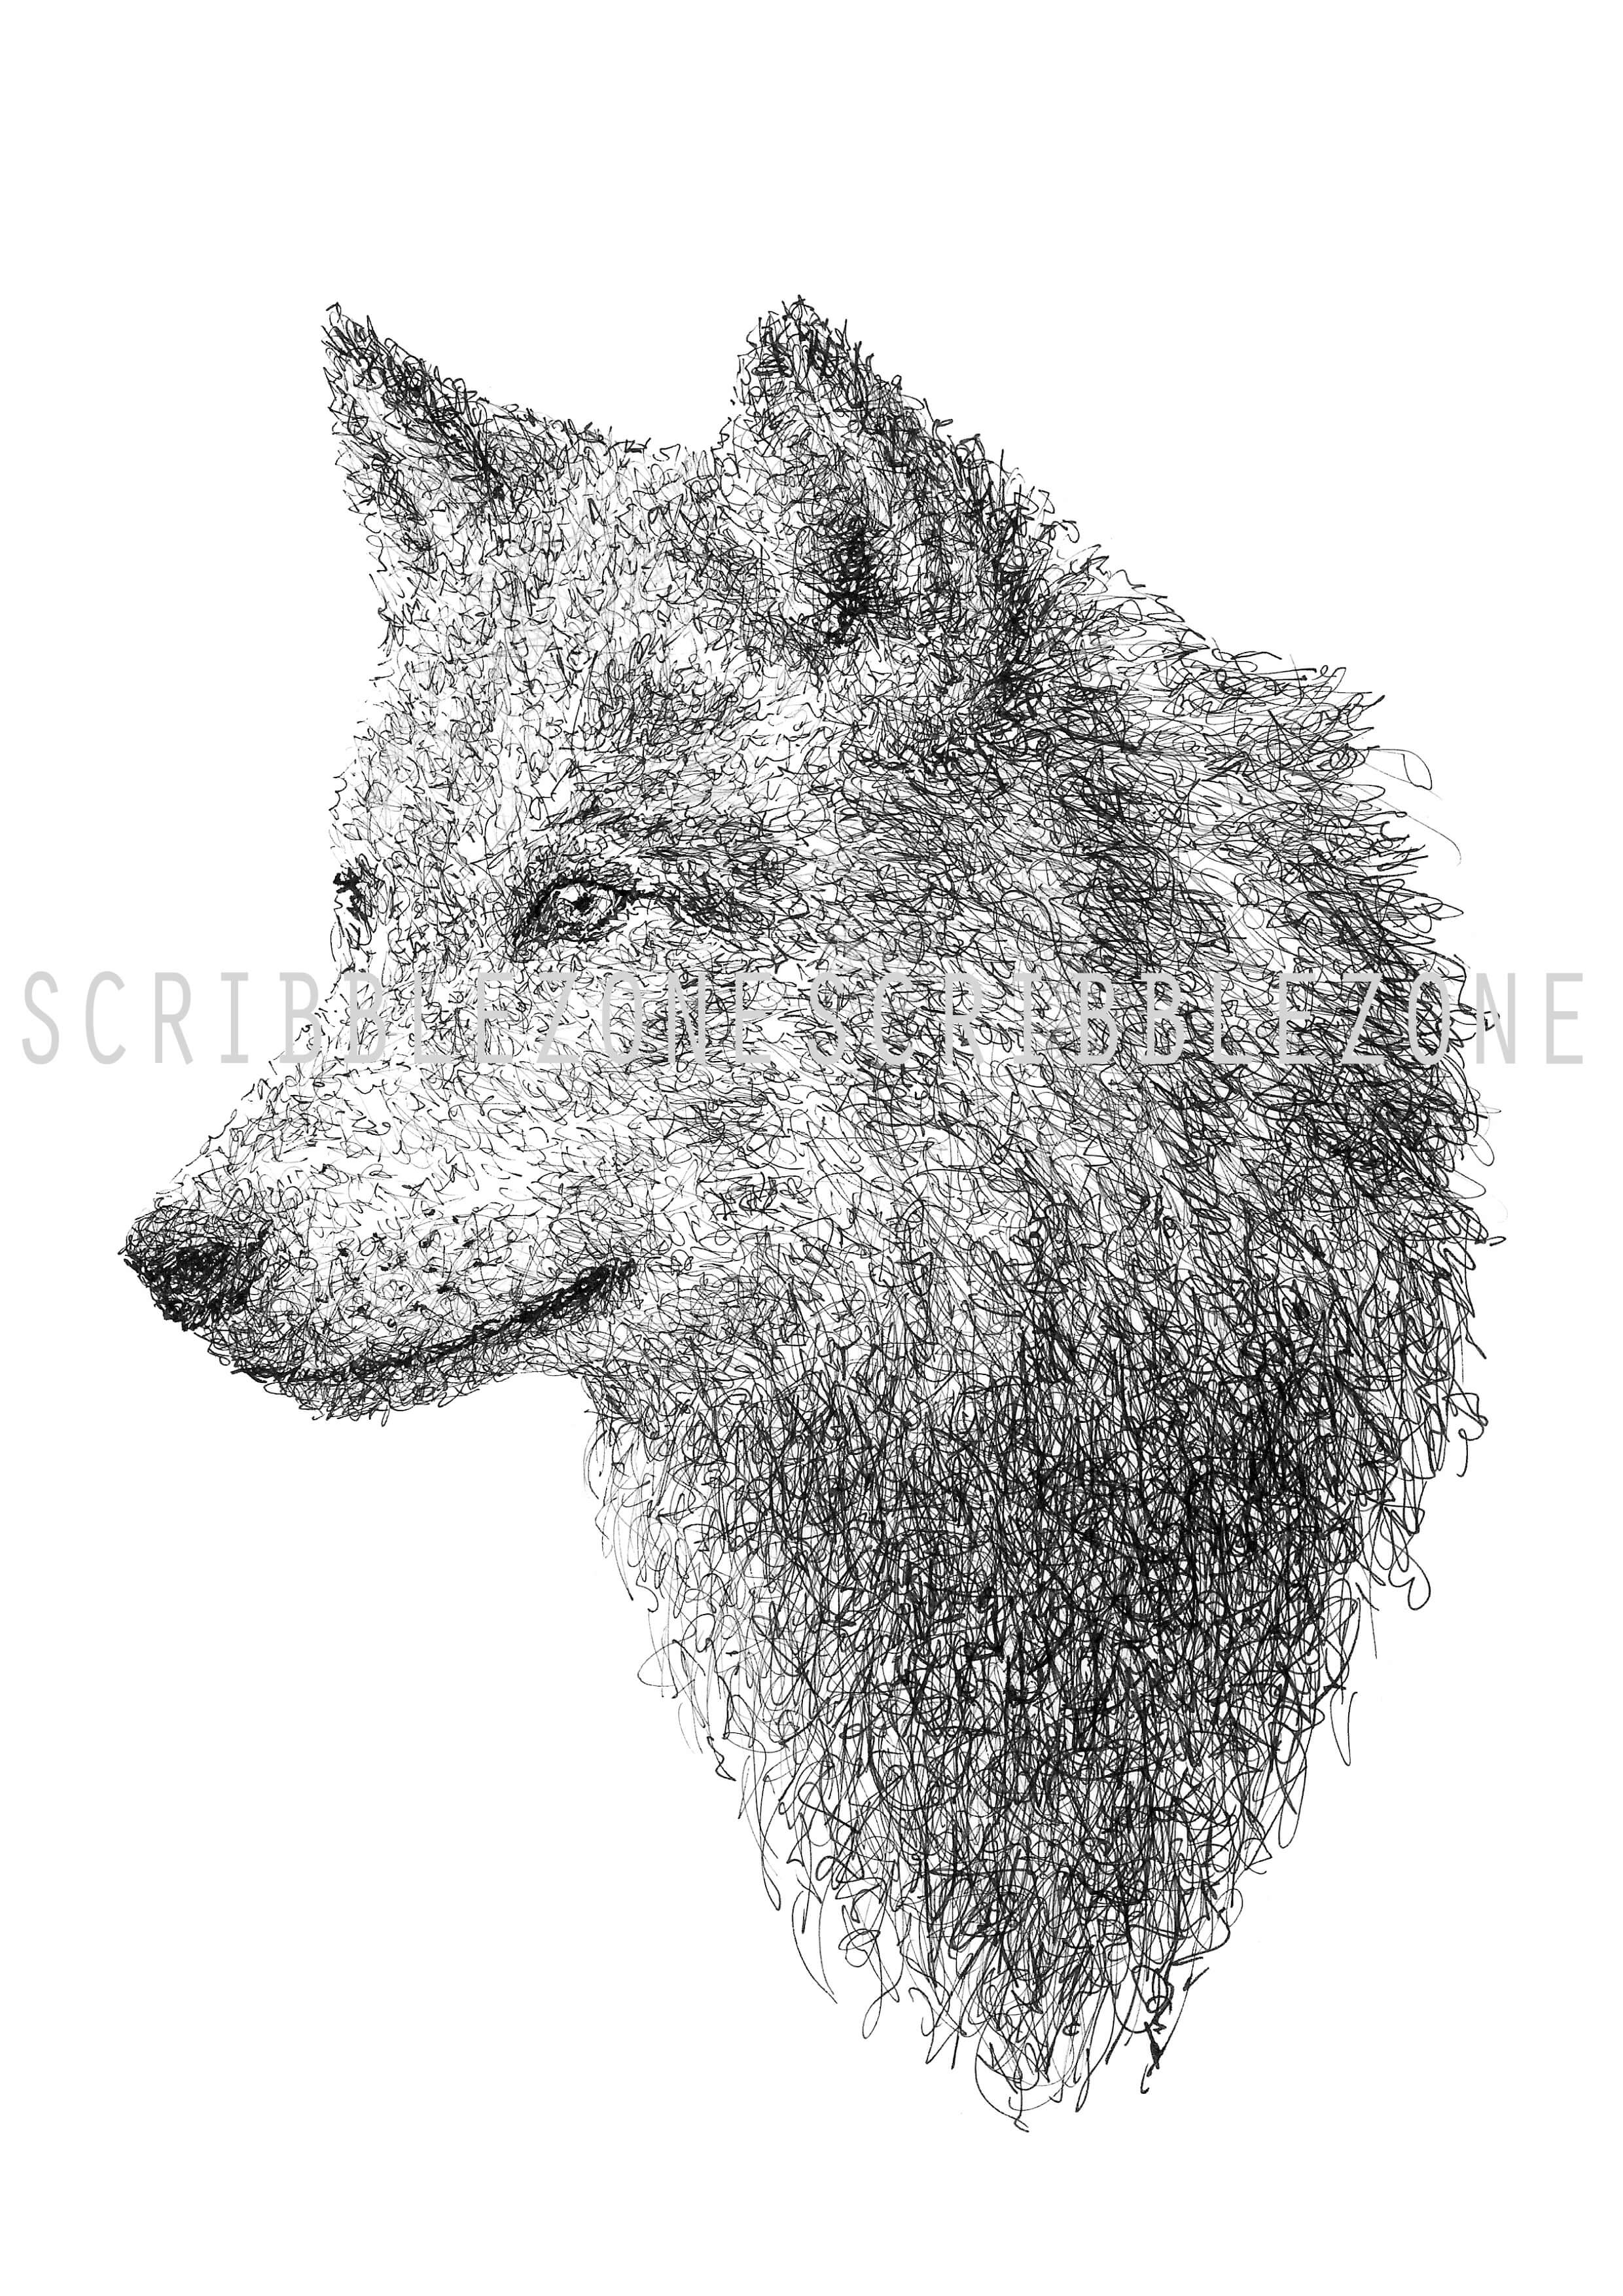 Scribbled Wolf